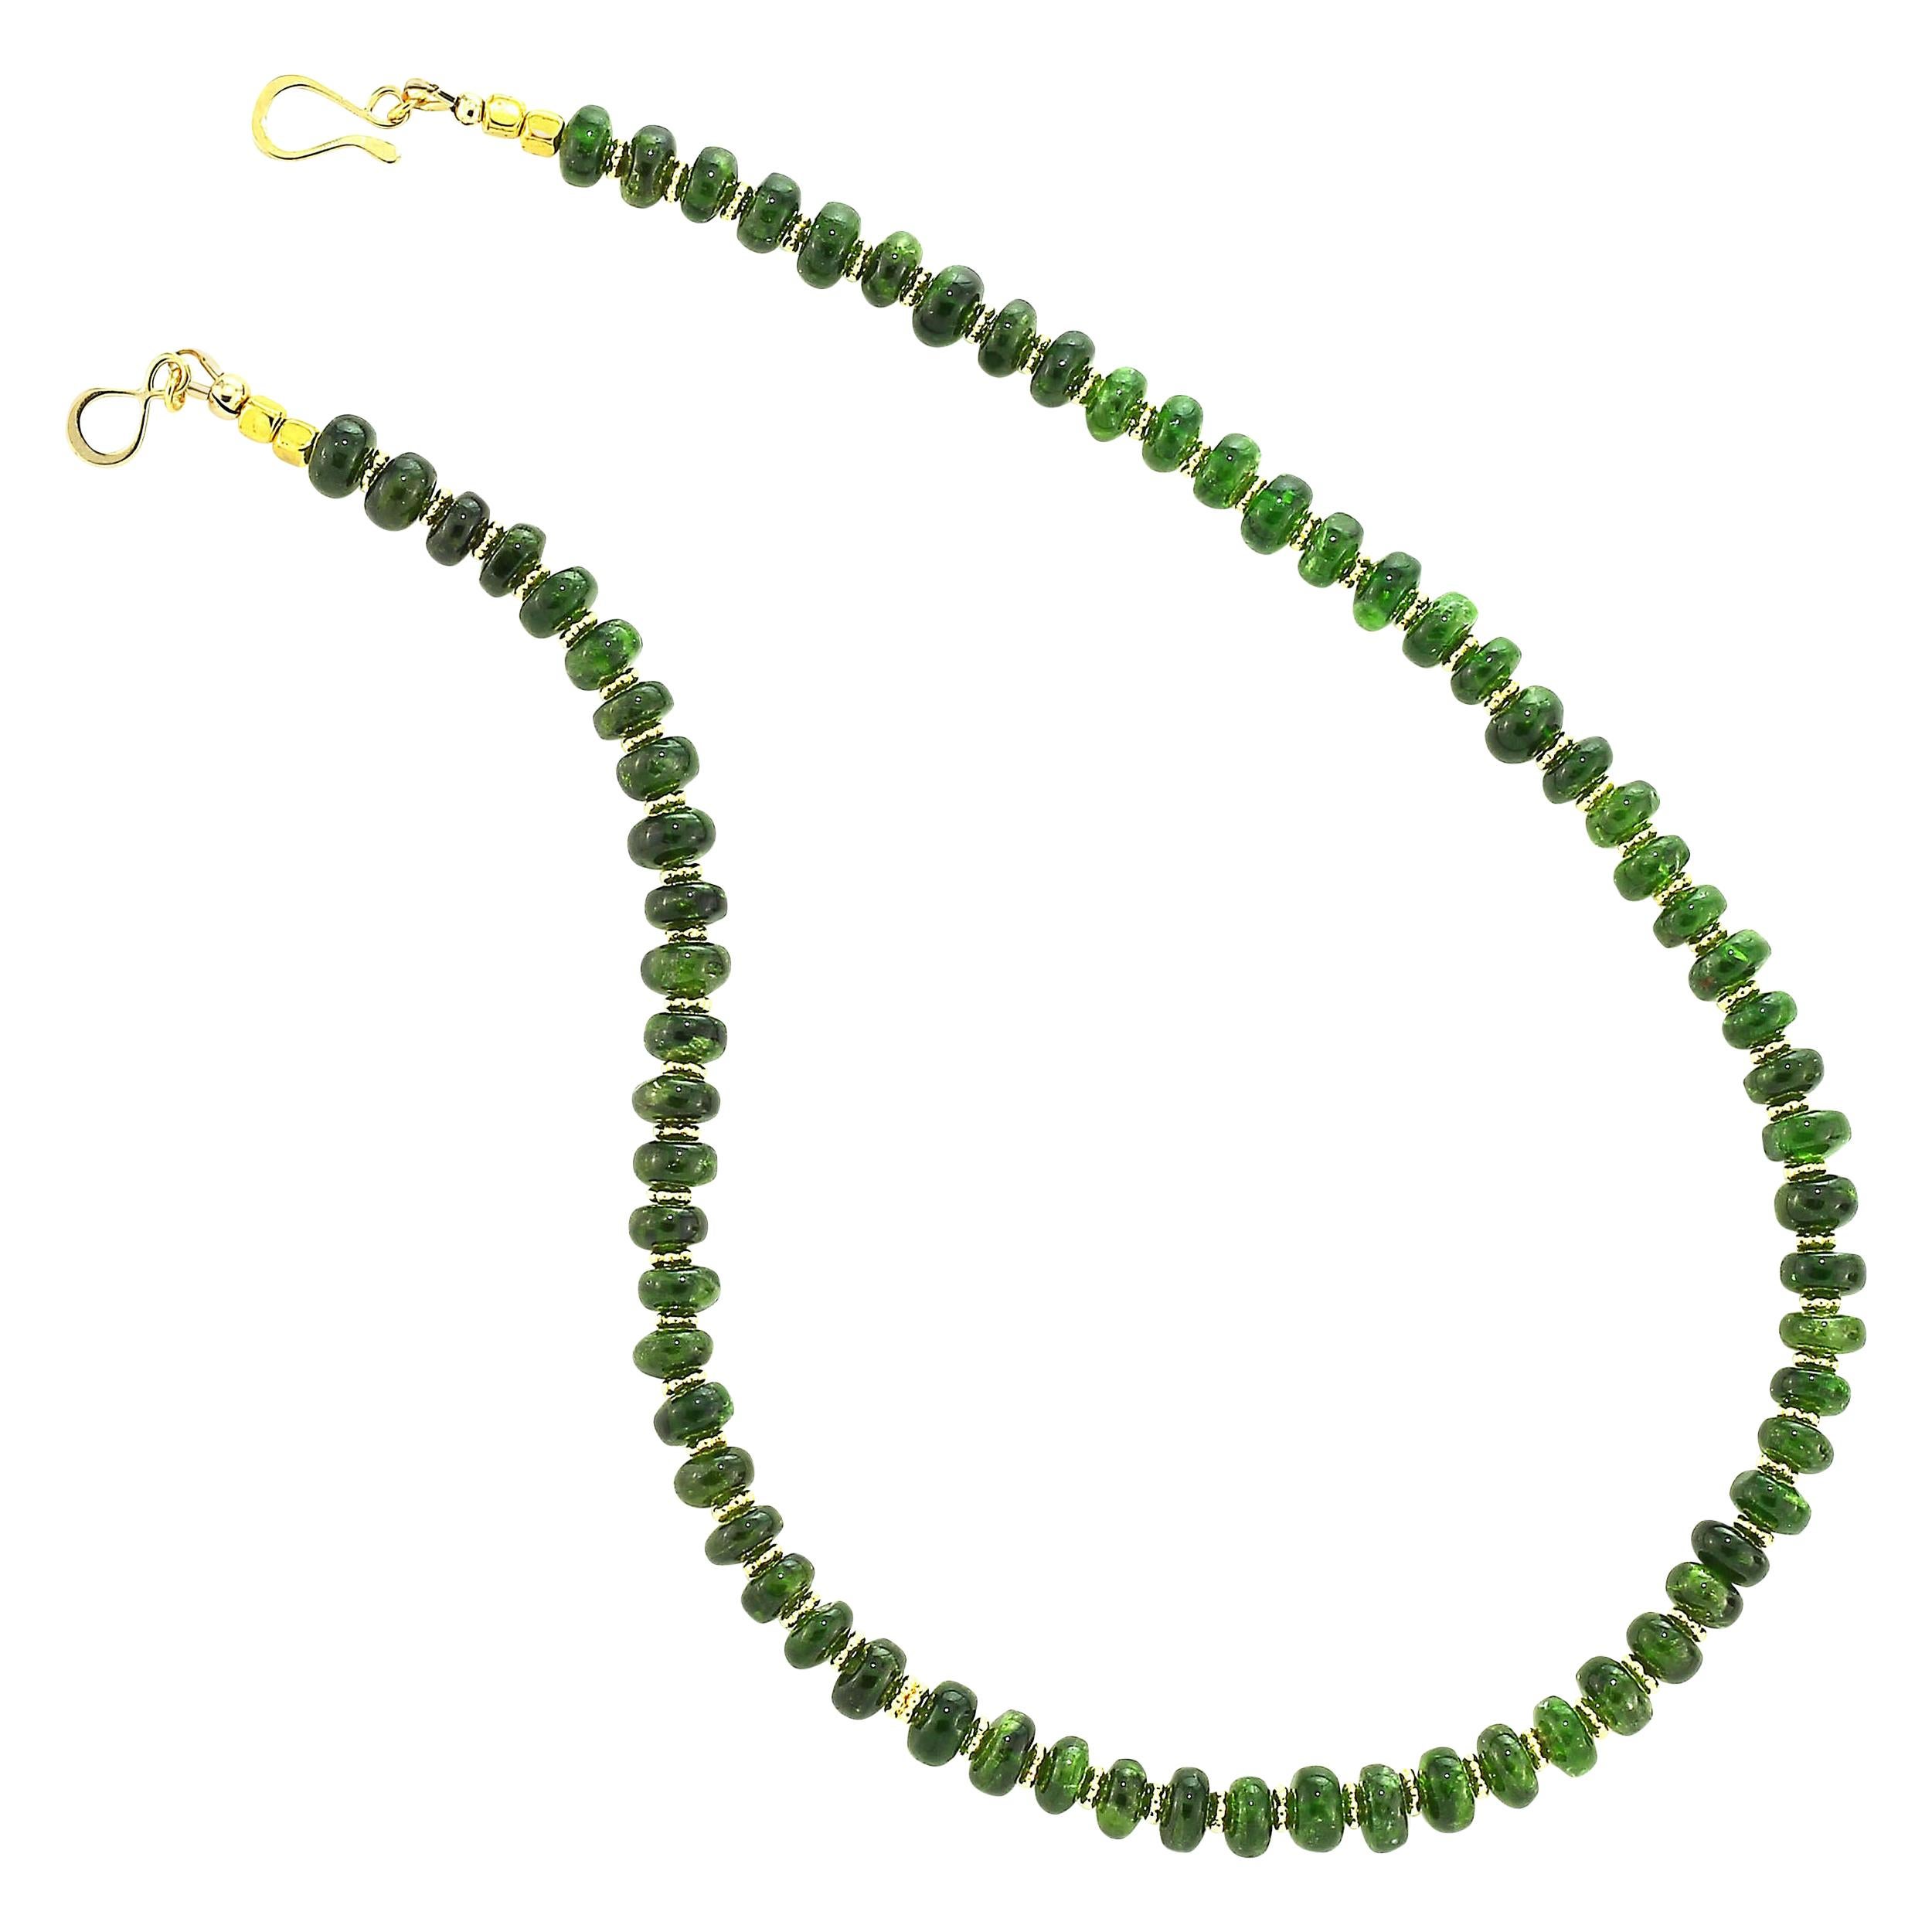 Gemjunky Sparkling Chrome Diopside Necklace with Goldy Accents